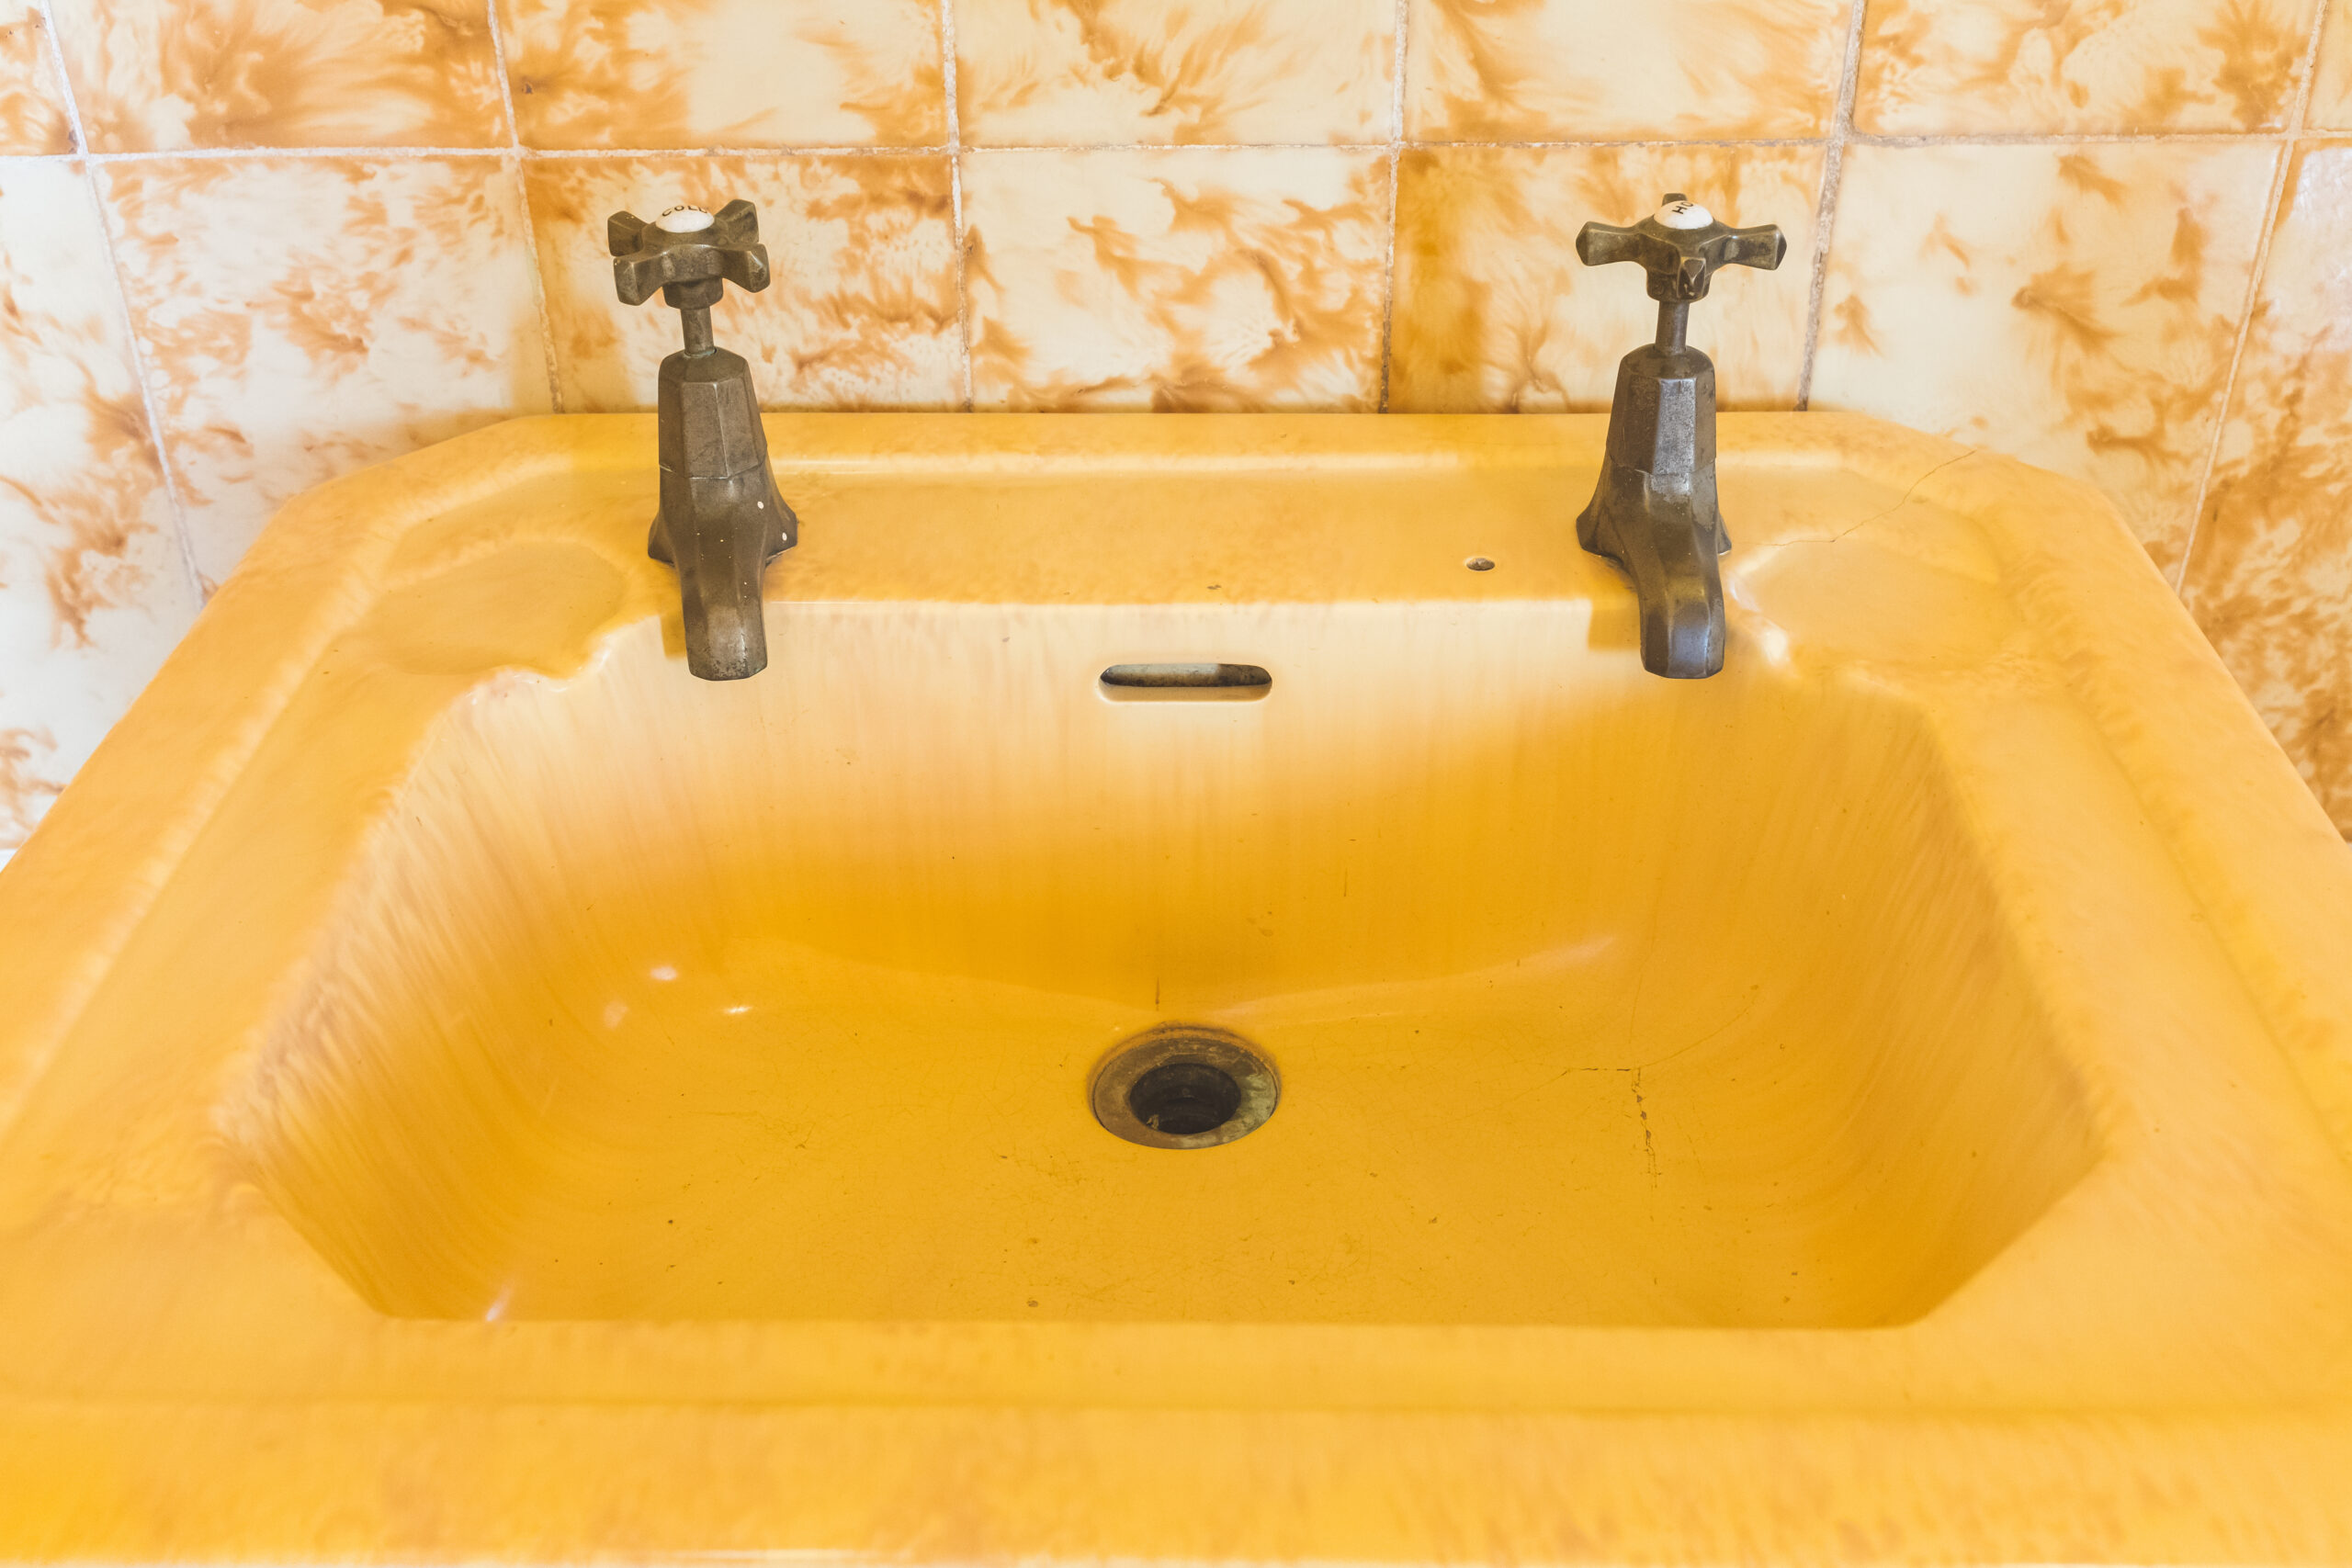 Vintage, yellow bathroom sink with old, outdated faucets